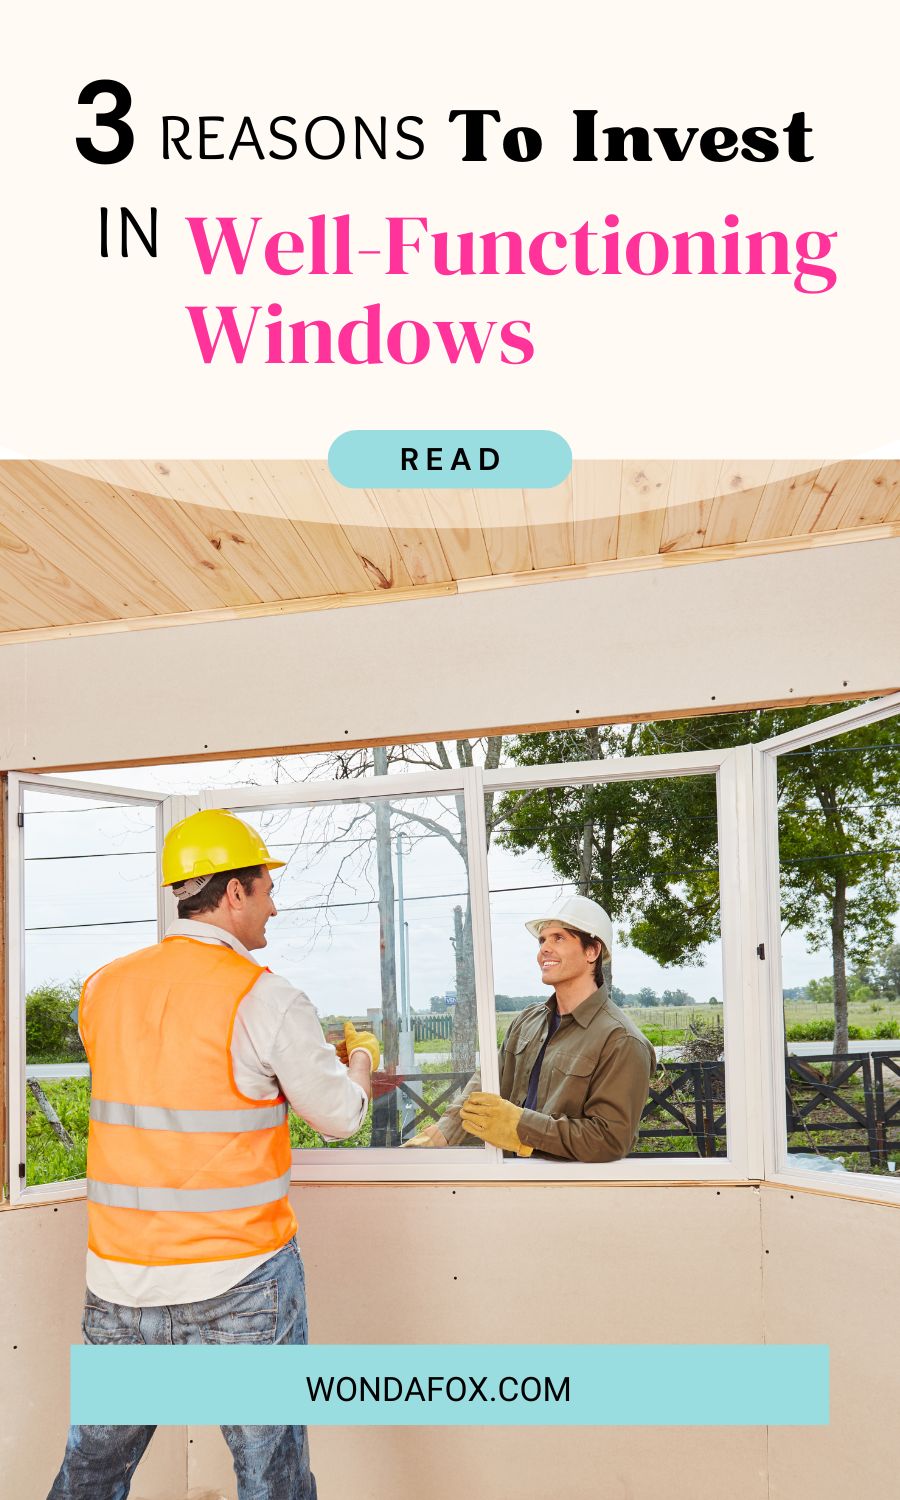 How important are well-functioning windows?